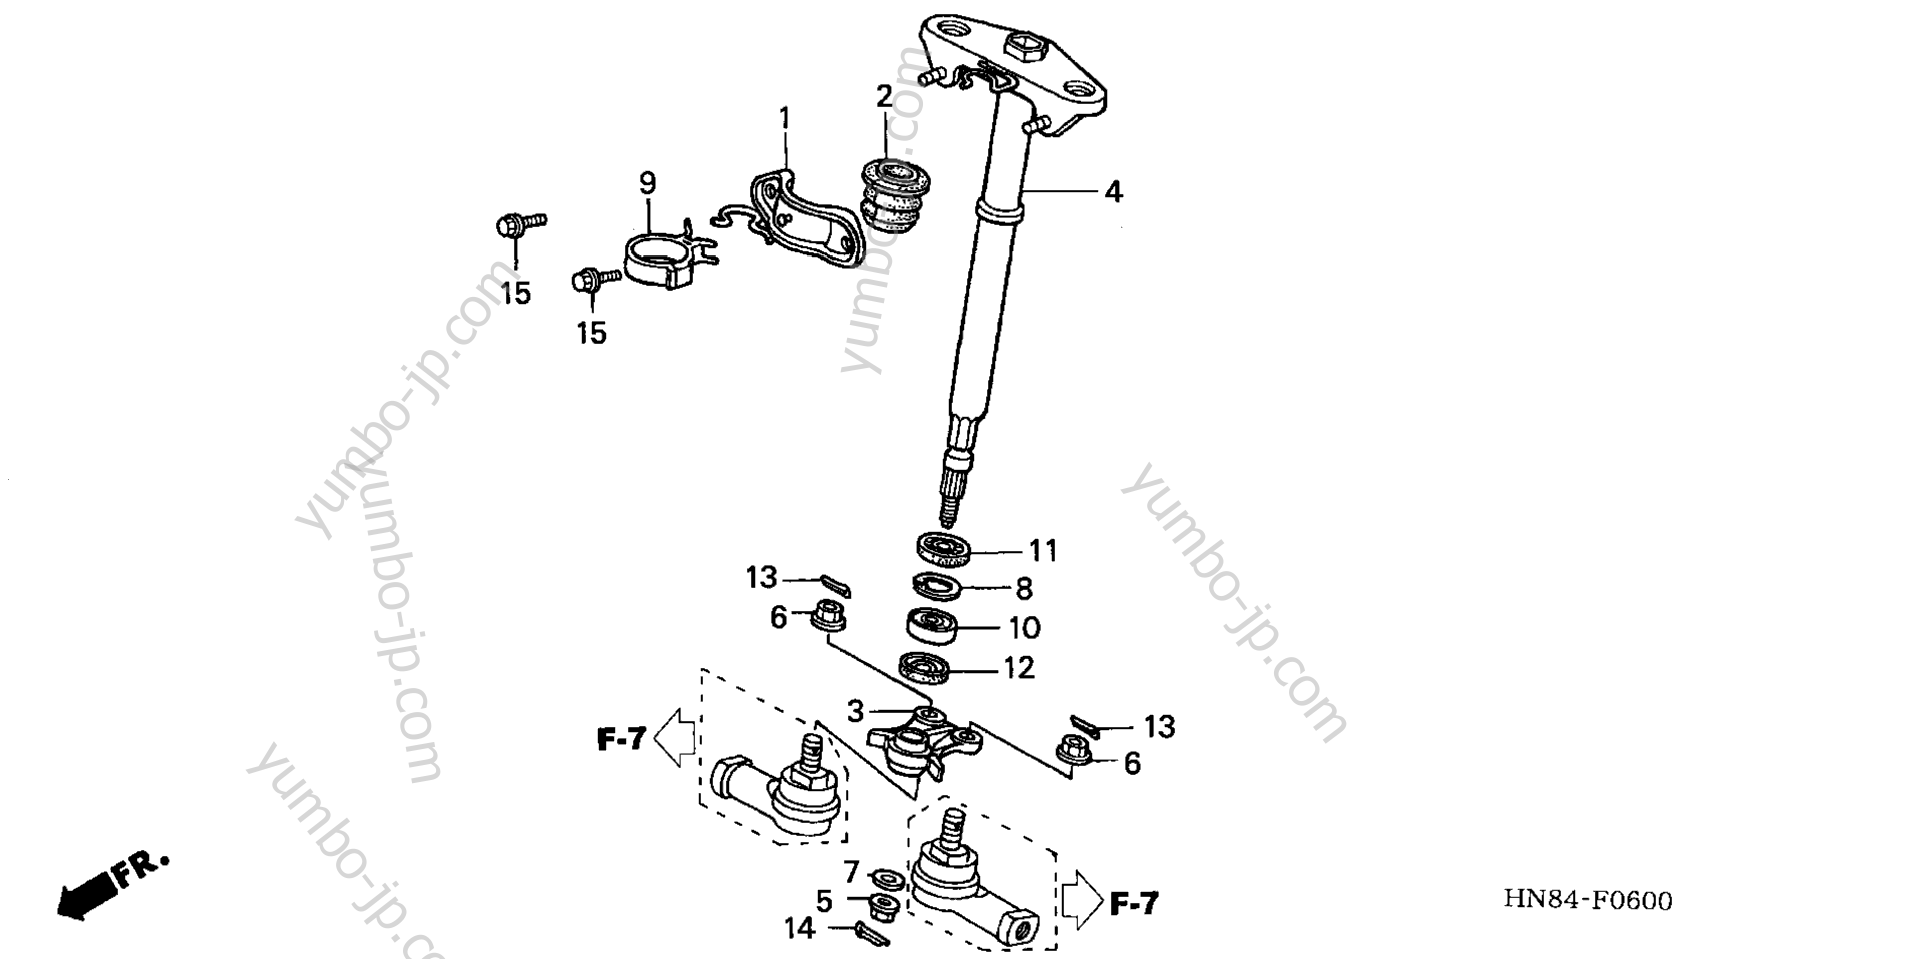 STEERING SHAFT for ATVs HONDA TRX650FA A 2004 year